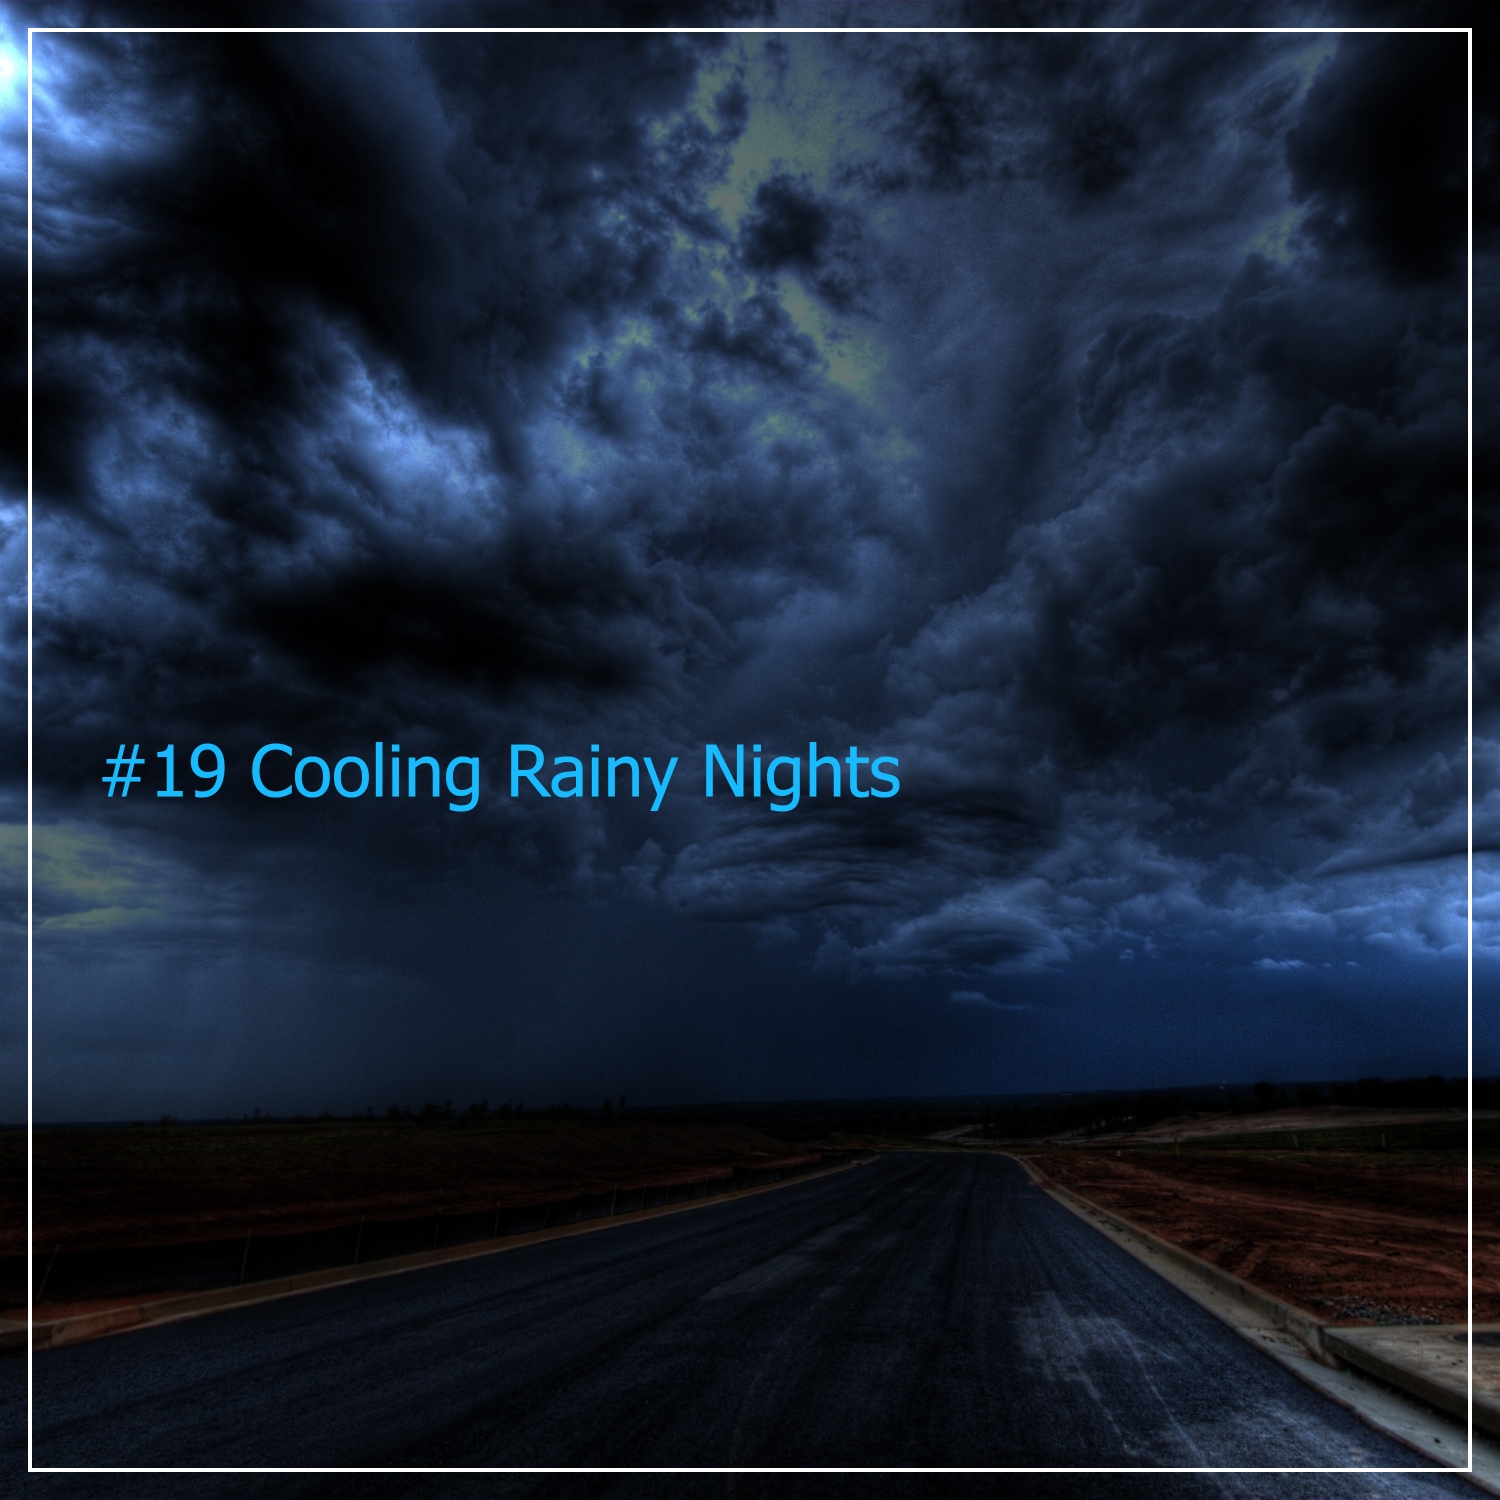 #19 Cooling Rainy Nights for Yoga or Spa